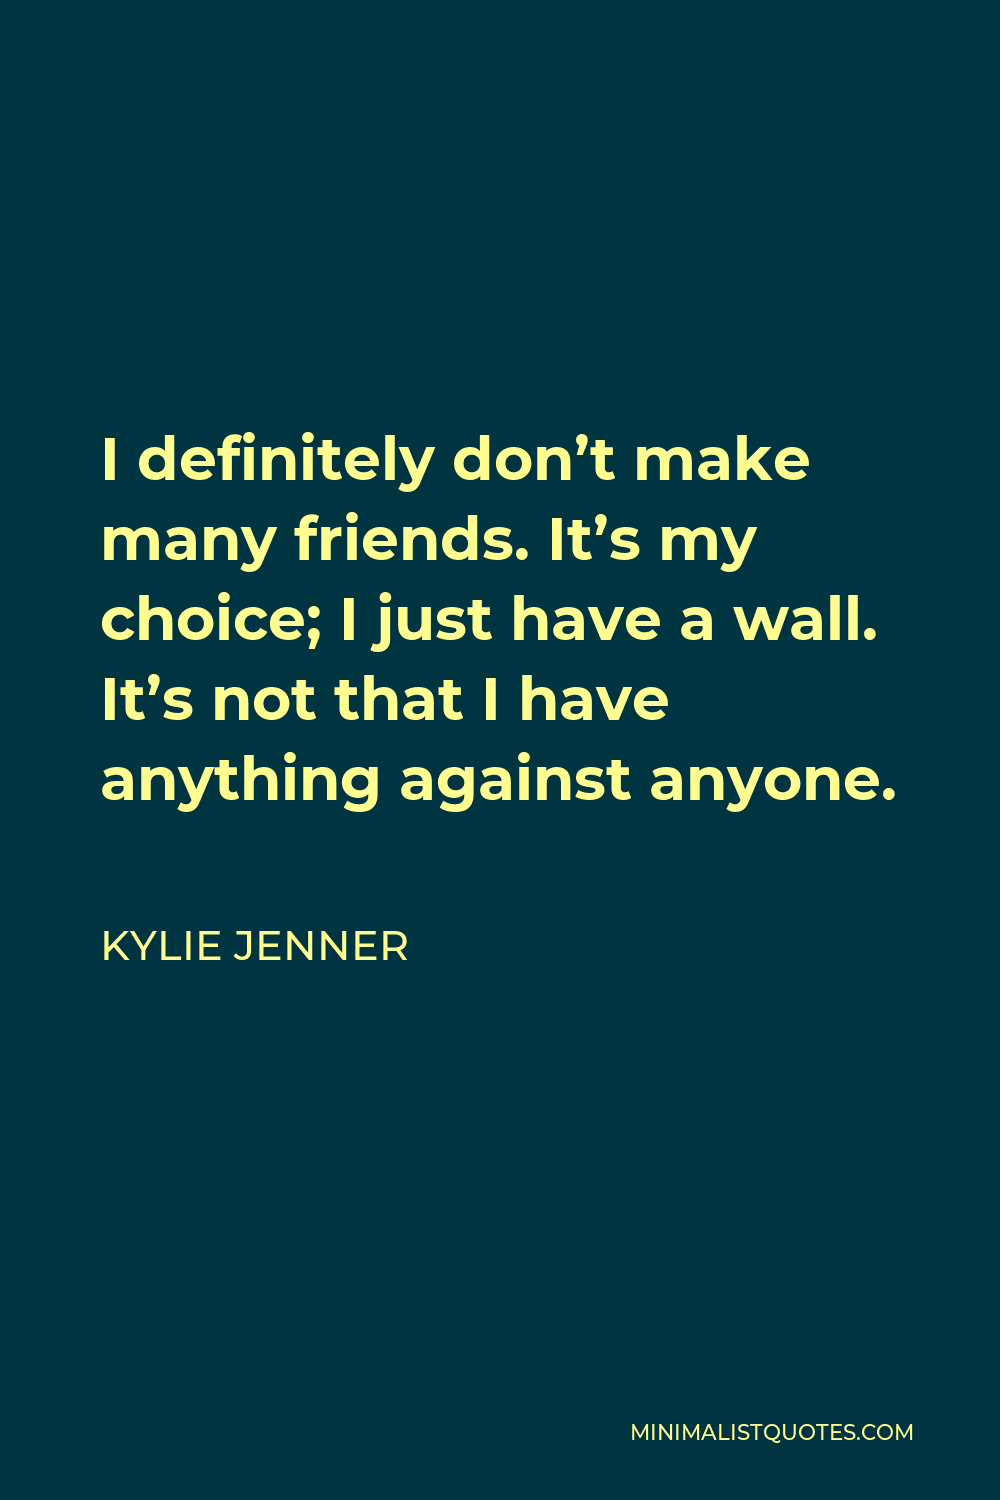 Kylie Jenner Quote - I definitely don’t make many friends. It’s my choice; I just have a wall. It’s not that I have anything against anyone.